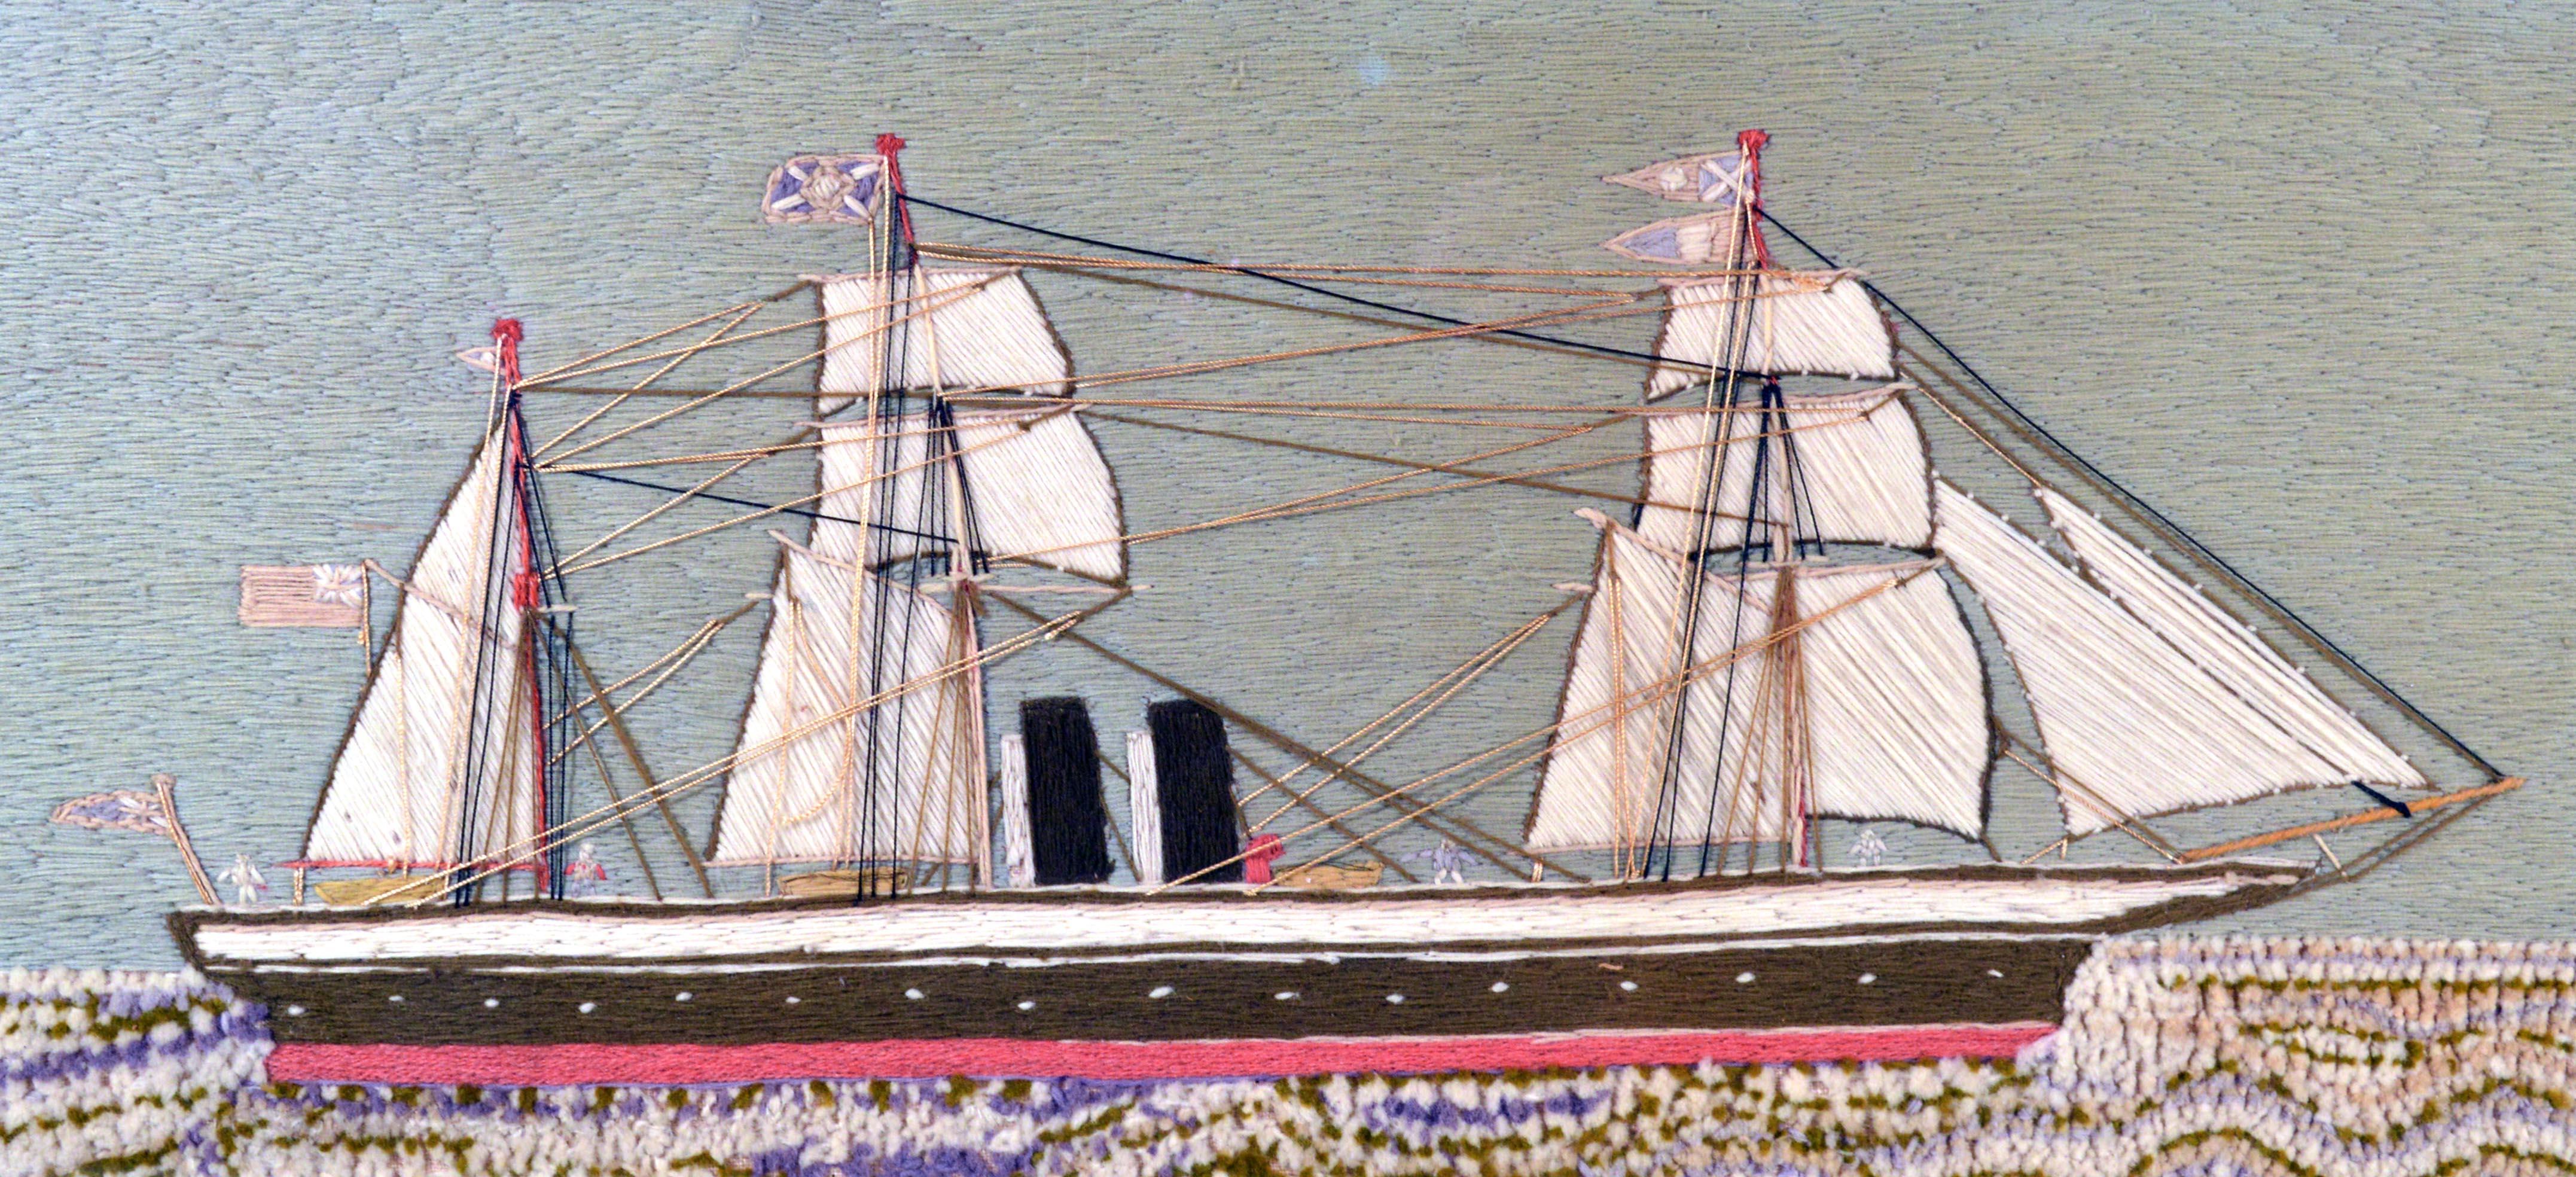 English Sailor's woolwork of a three-mastered double funnel merchant ship,
circa 1880

The woolie shows a starboard side view of the three-mastered ship under full sail with various figures visible on board. The masts with various different flags